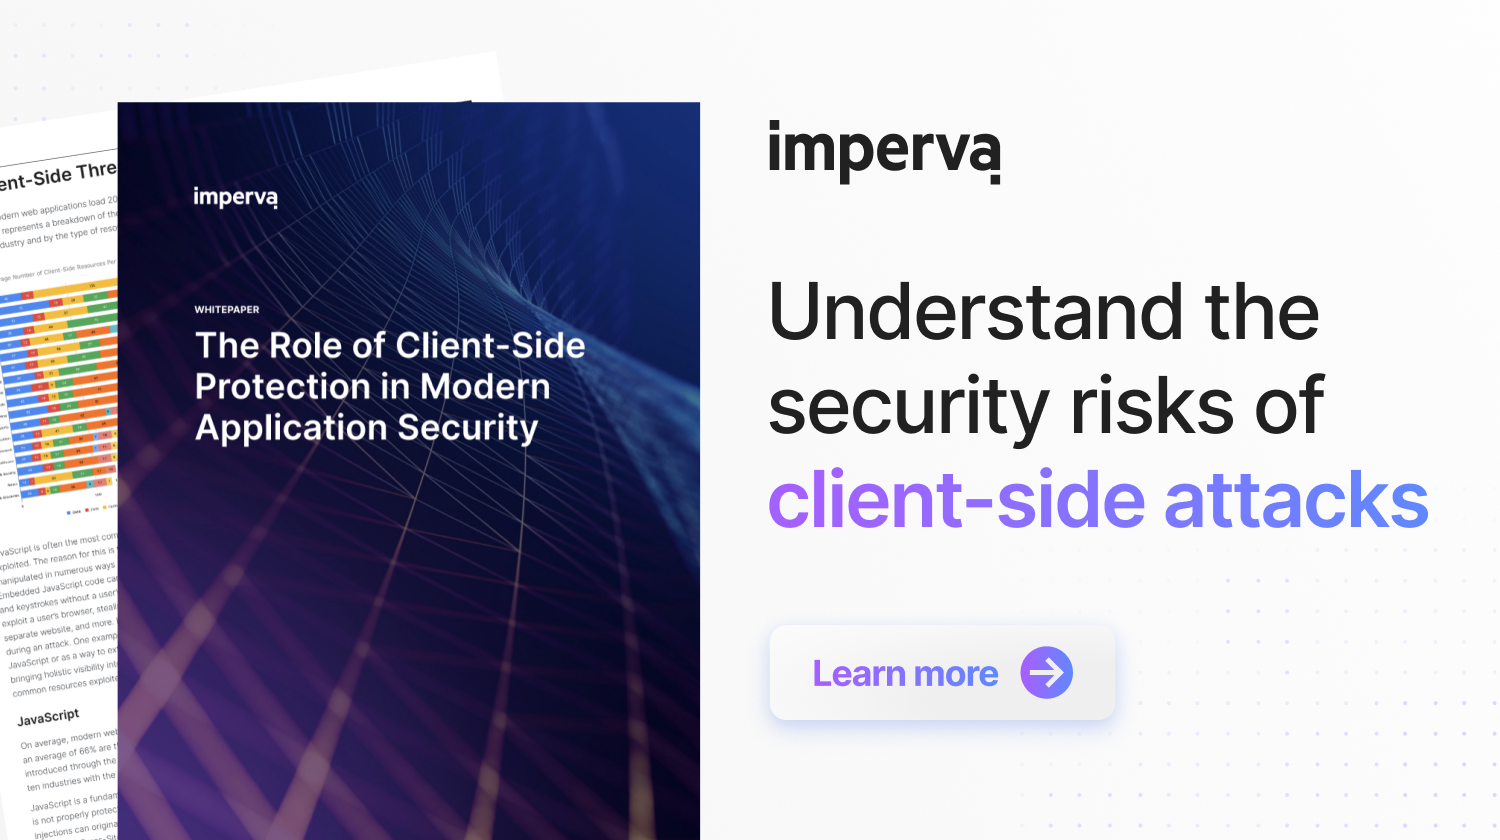 Imperva | The Role of Client-Side Protection